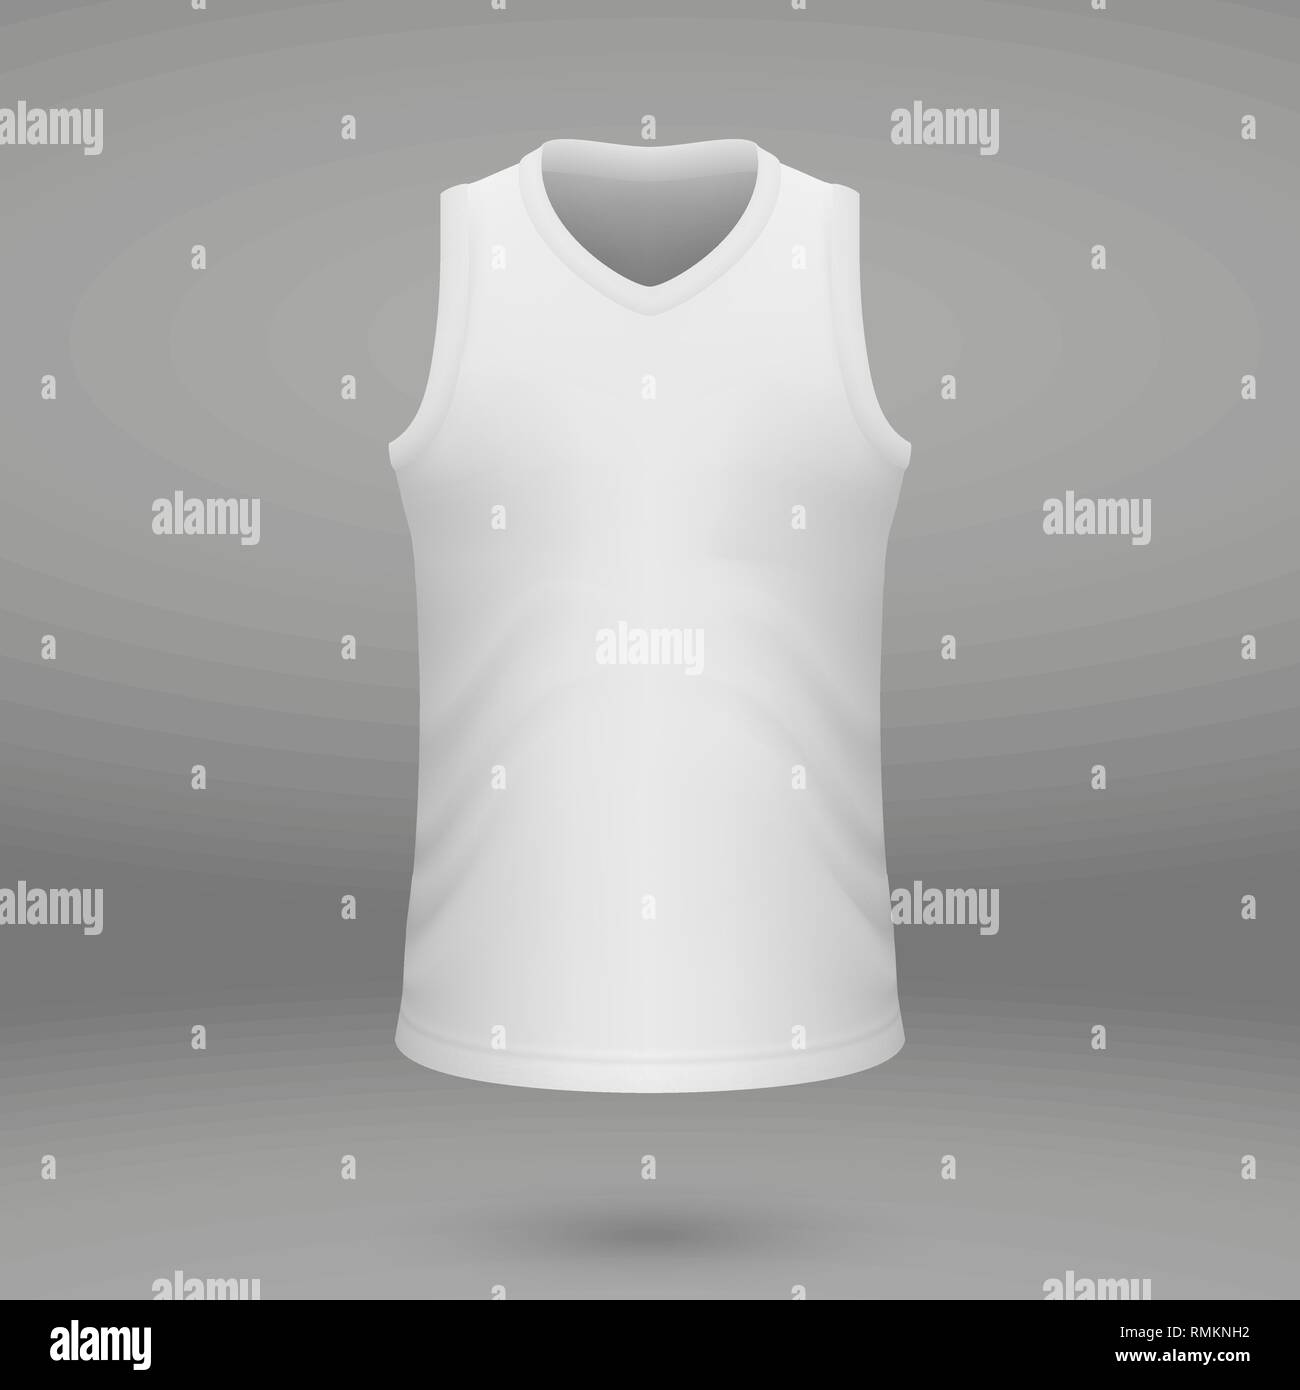 Premium Vector  Basketball jersey design and template for